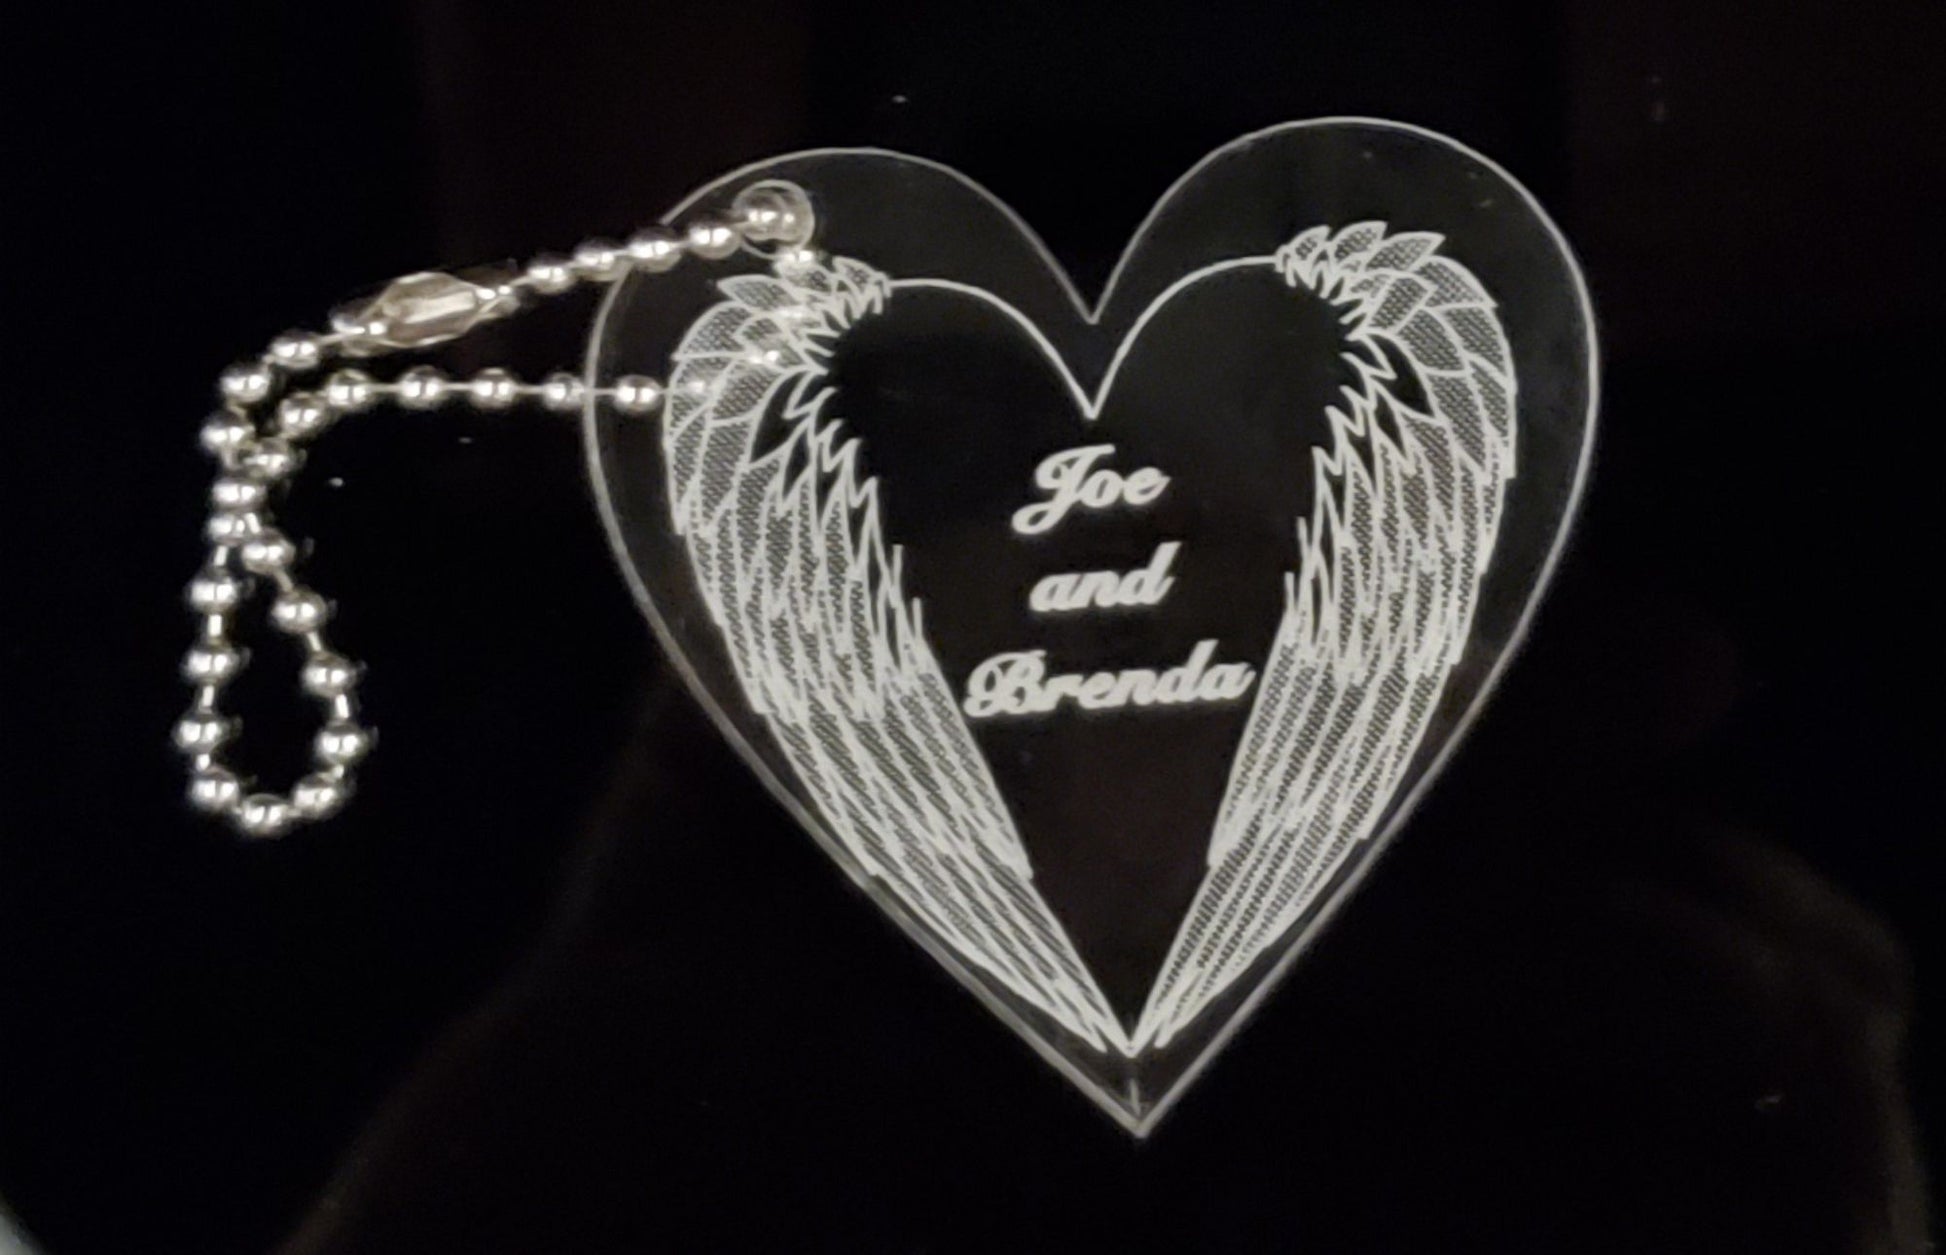 heart shaped acrylic keychain designed with downward angel wings and engraved with names, attached is a small metal chain